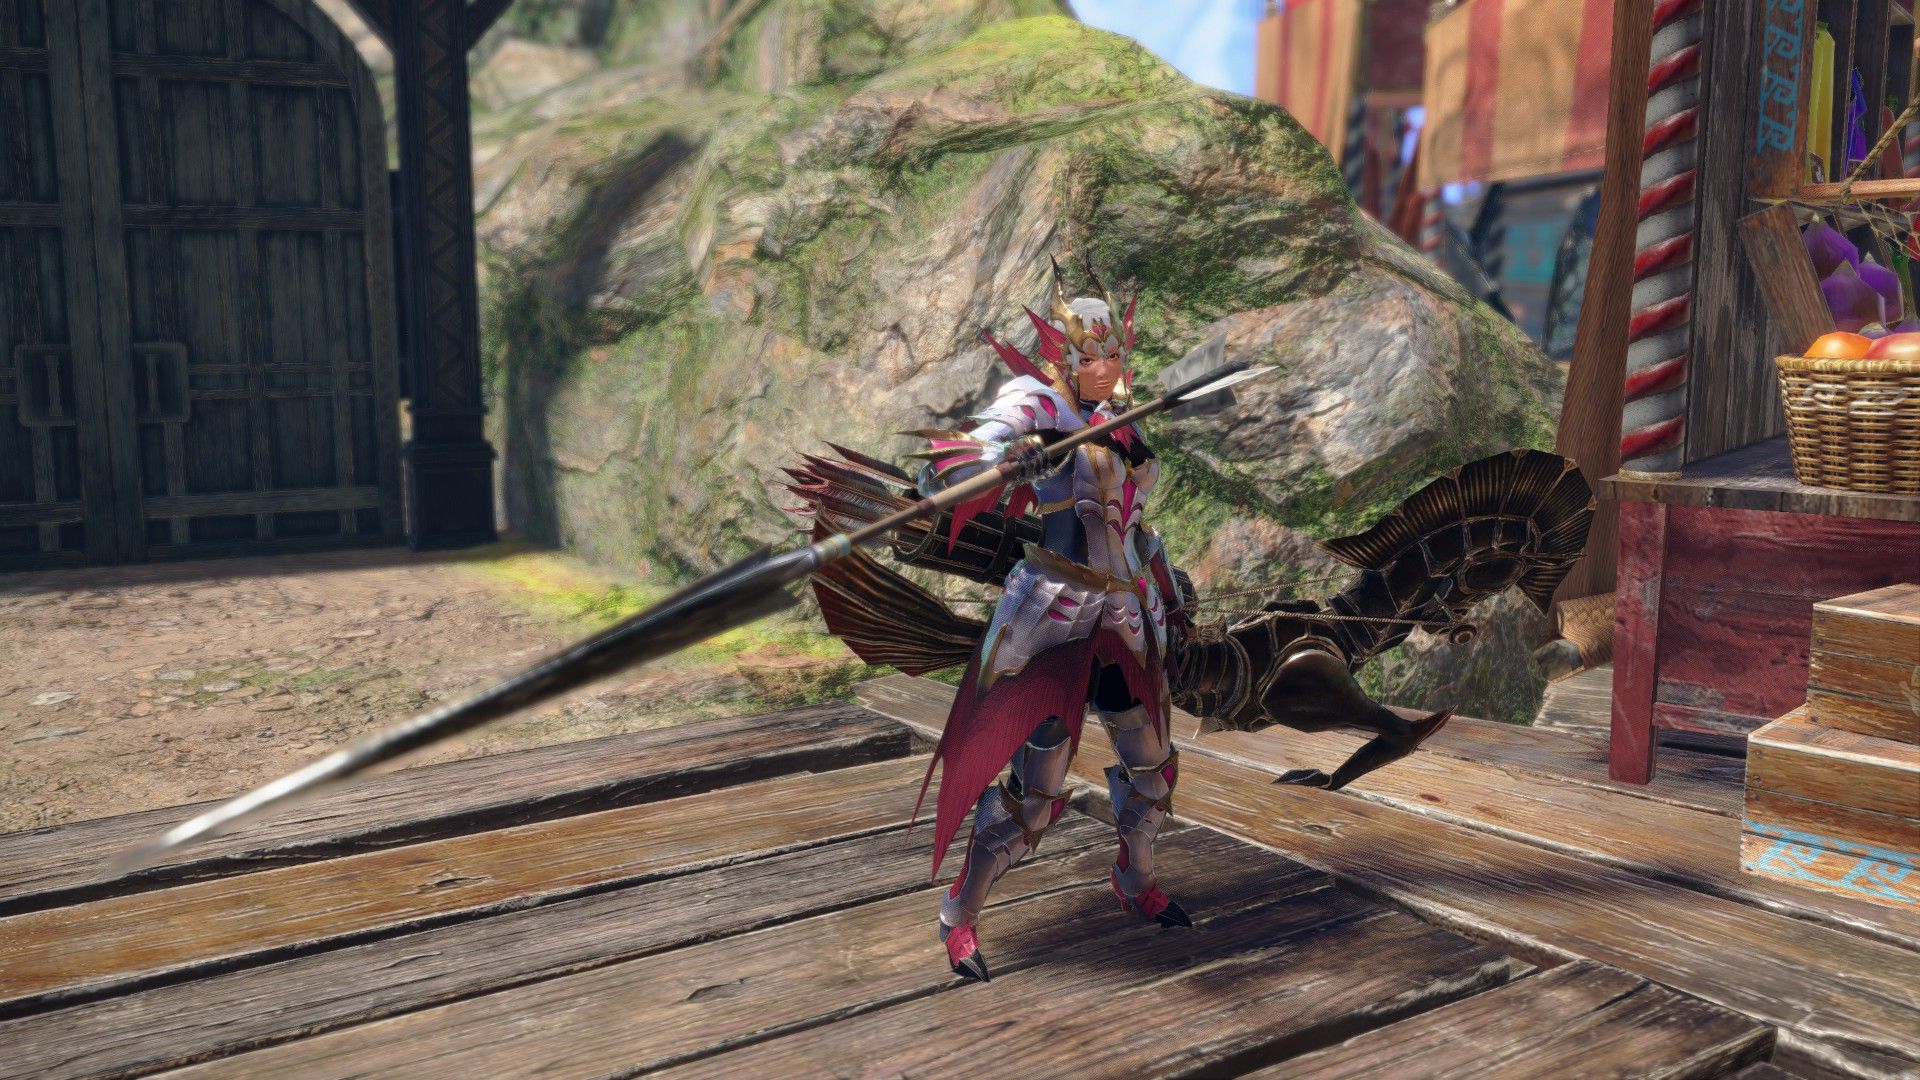 A female player character in Monster Hunter Rise Sunbreak with Malzeno armor and the Kushala Daora bow.